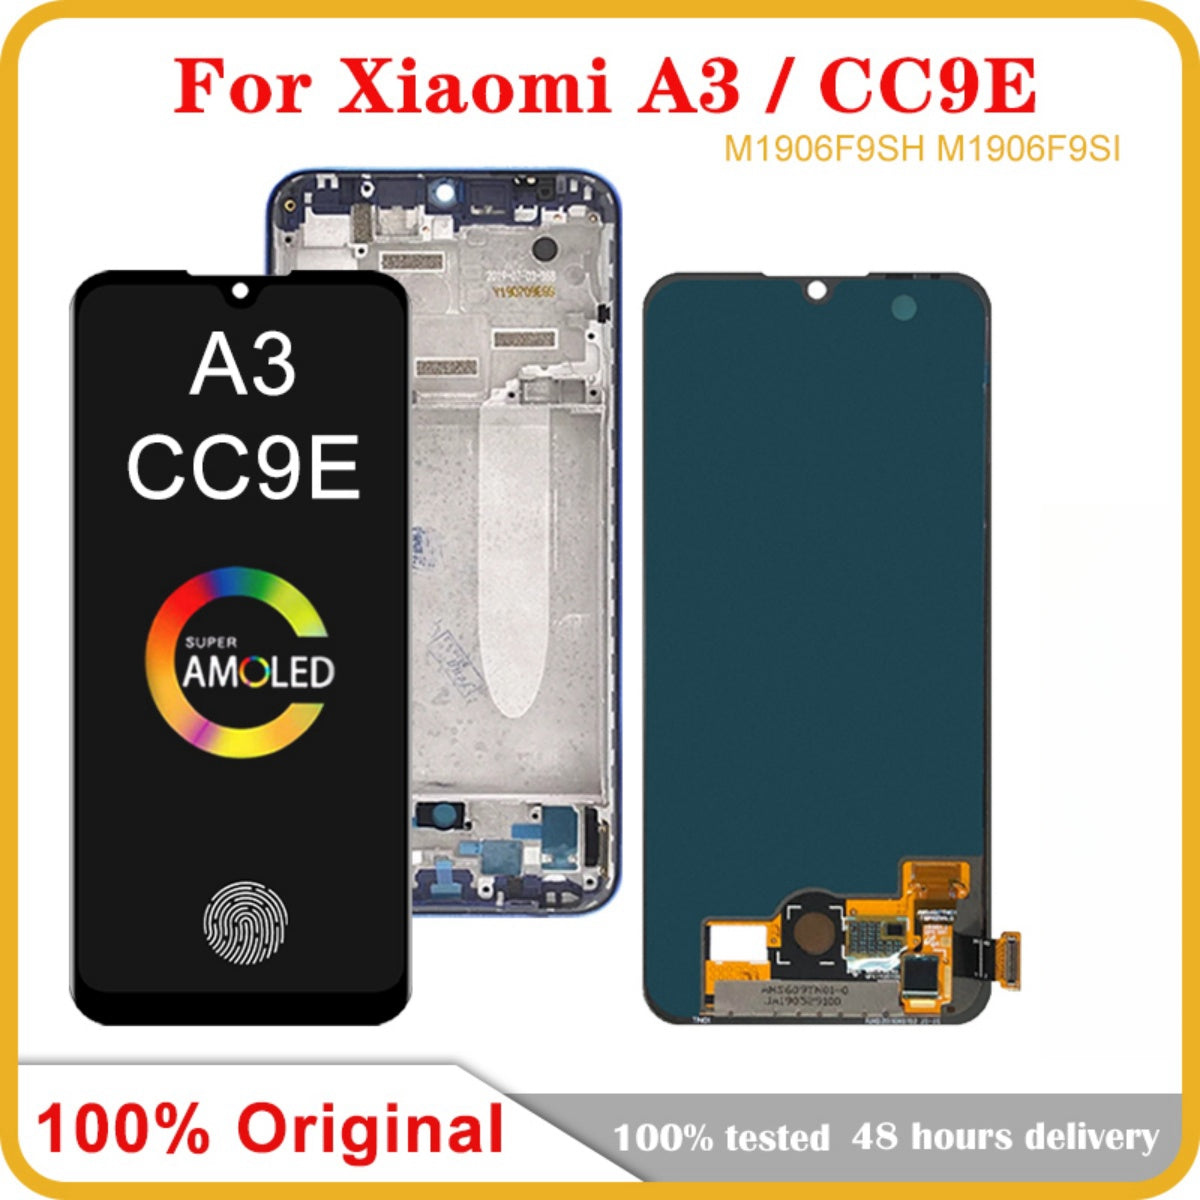 Replacement AMOLED Display Touch Screen With Frame for Xiaomi Mi A3 CC9e  M1906F9SH M1906F9SI – iProGadgets